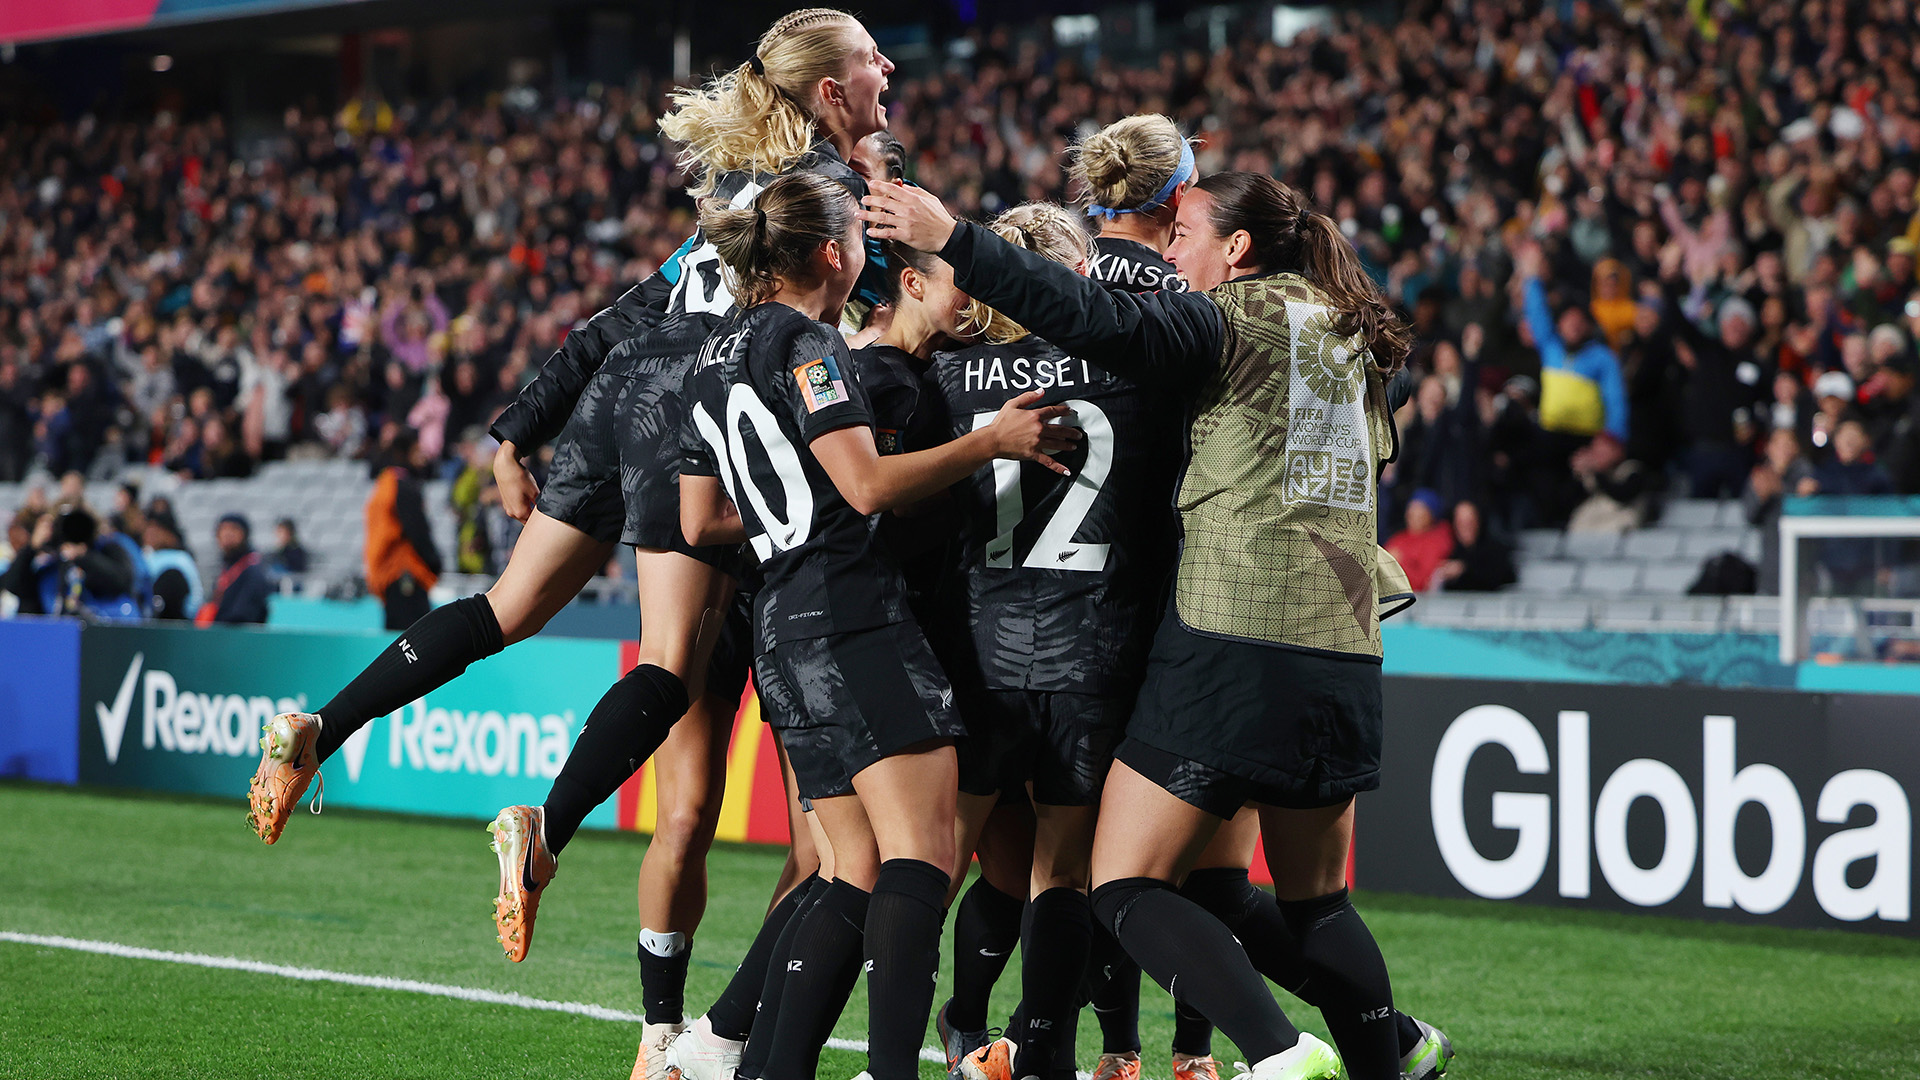 Hannah Wilkinson (2nd R) of New Zealand celebrates with teammates after scoring her team's first goal during the FIFA Women's World Cup Australia &amp; New Zealand 2023 Group A match between New Zealand and Norway at Eden Park on July 20, 2023 in Auckland, New Zealand.